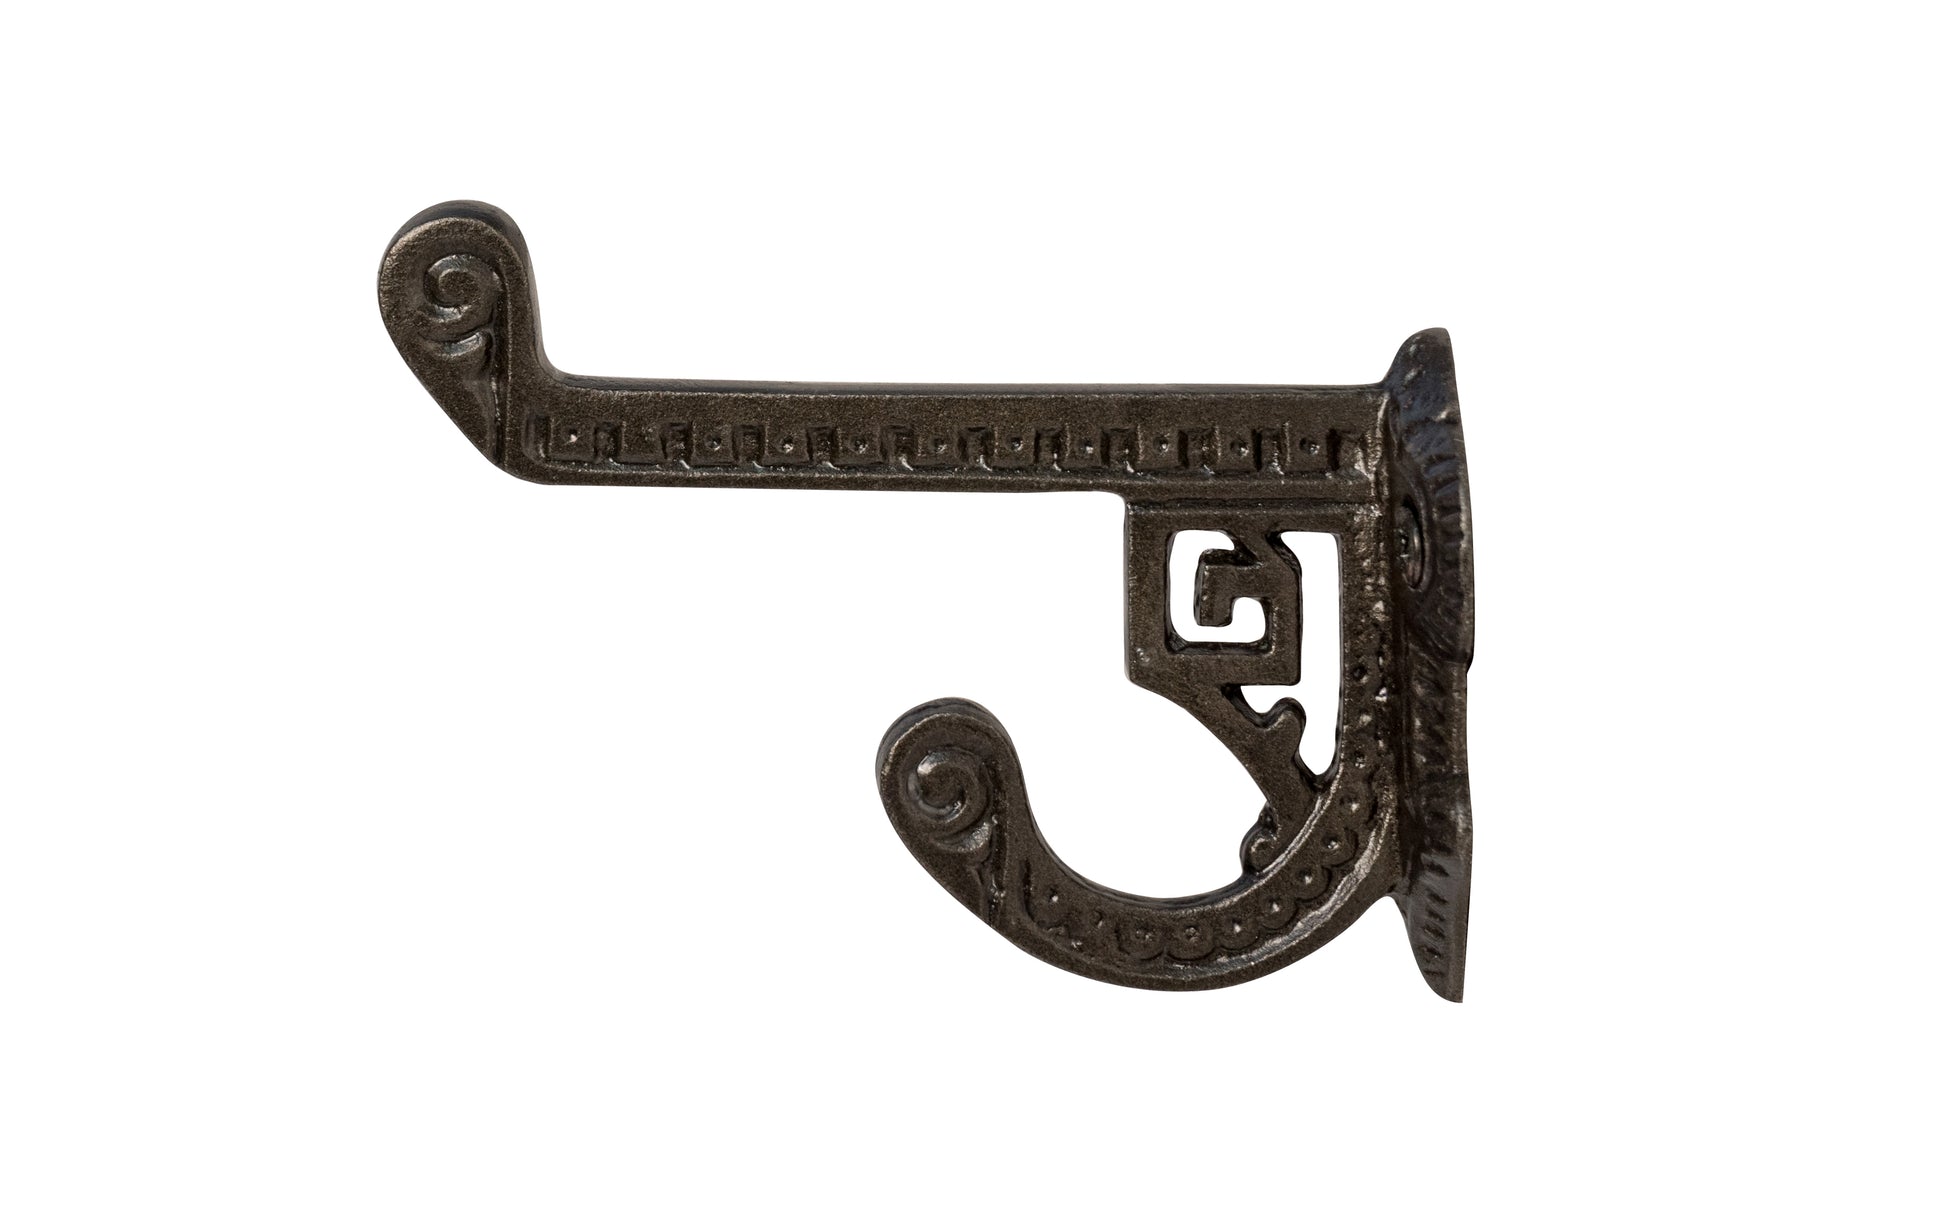 Cast Iron Ornate Hook ~ Traditional & classic ~ Vintage-style double hook ~ Made of heavy cast iron ~ 3-7/8" hook projection ~ Includes 2 phillips flat head screws ~ Intricate & ornate design